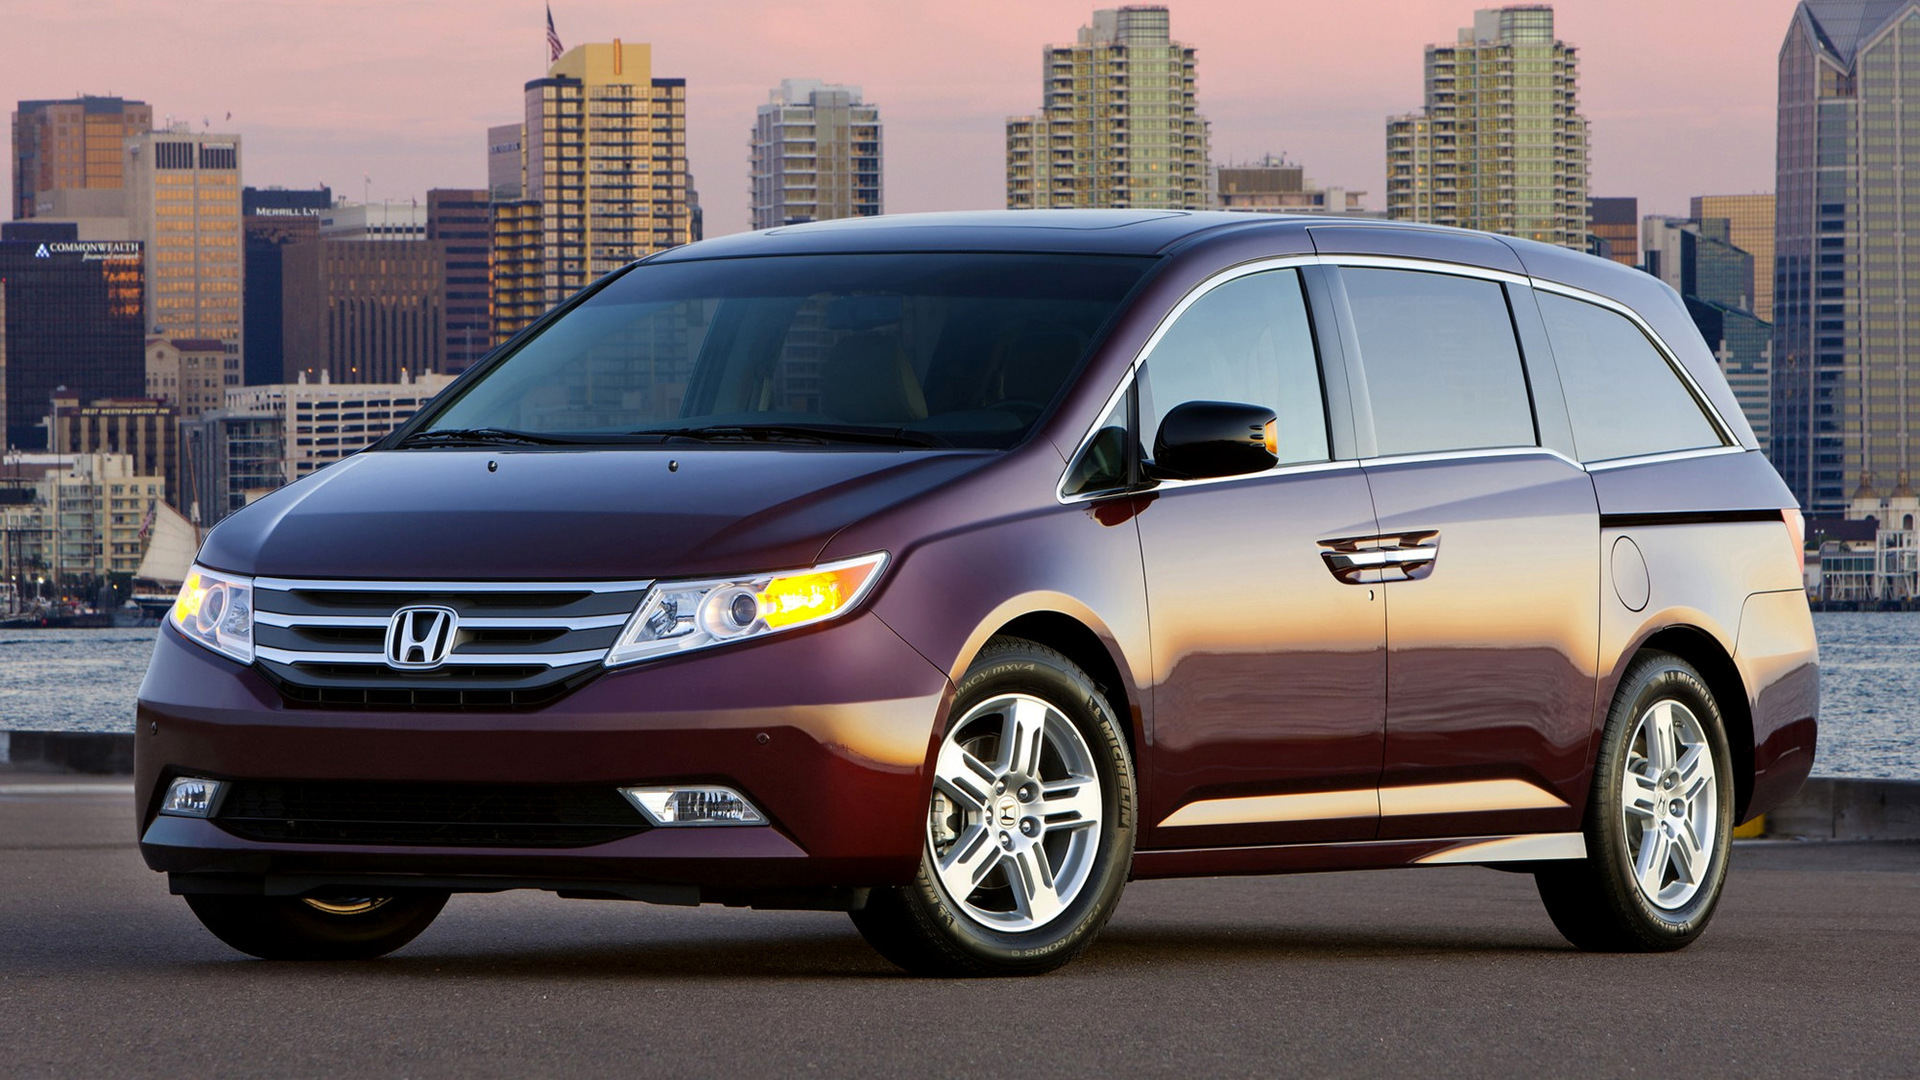 Honda Odyssey (2010) US Wallpapers and HD Images - Car Pixel